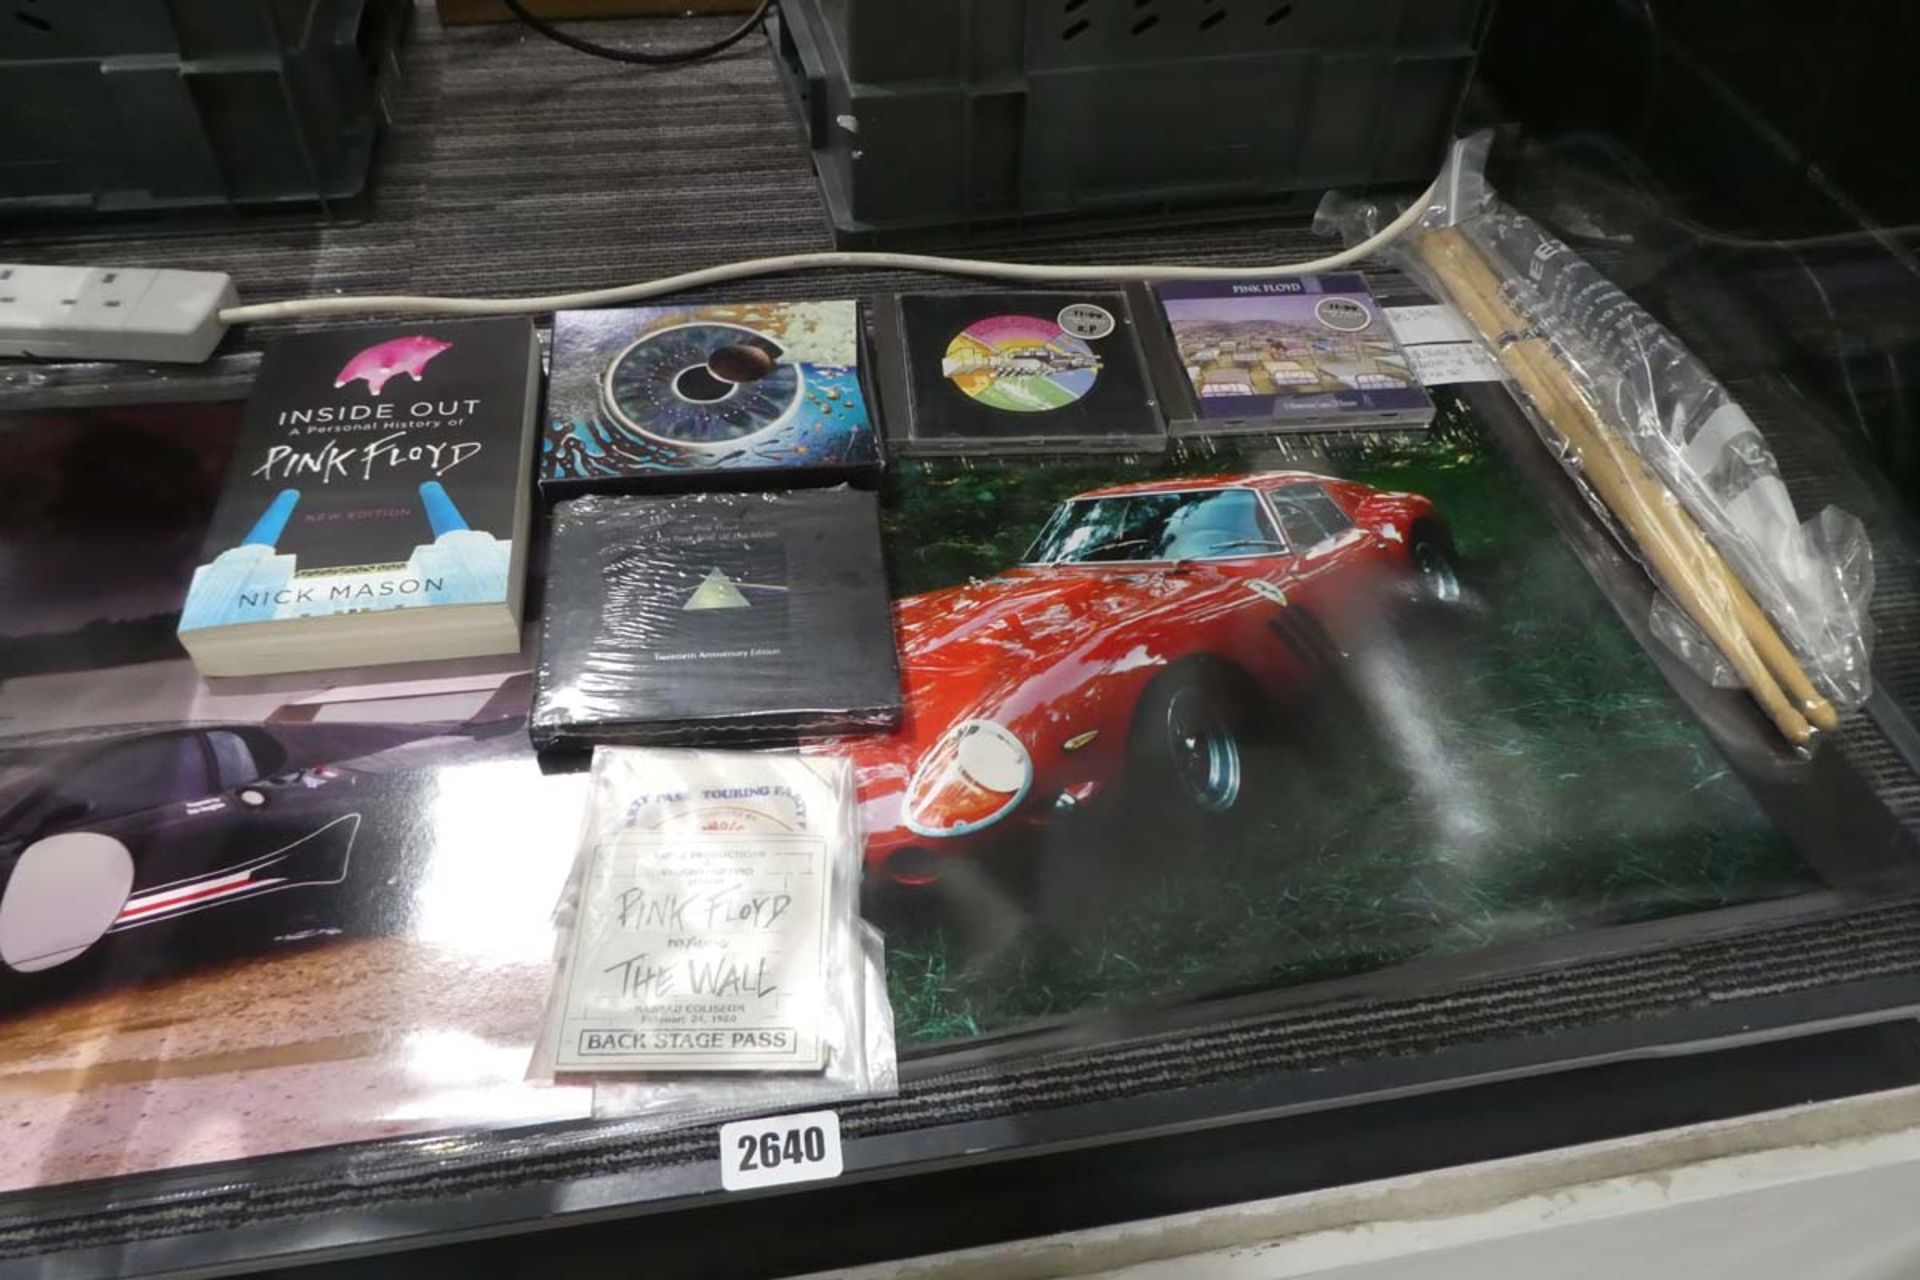 Nick Mason Pink Floyd collection set including photos of his cars, various CD's, drumsticks, tour - Image 3 of 3